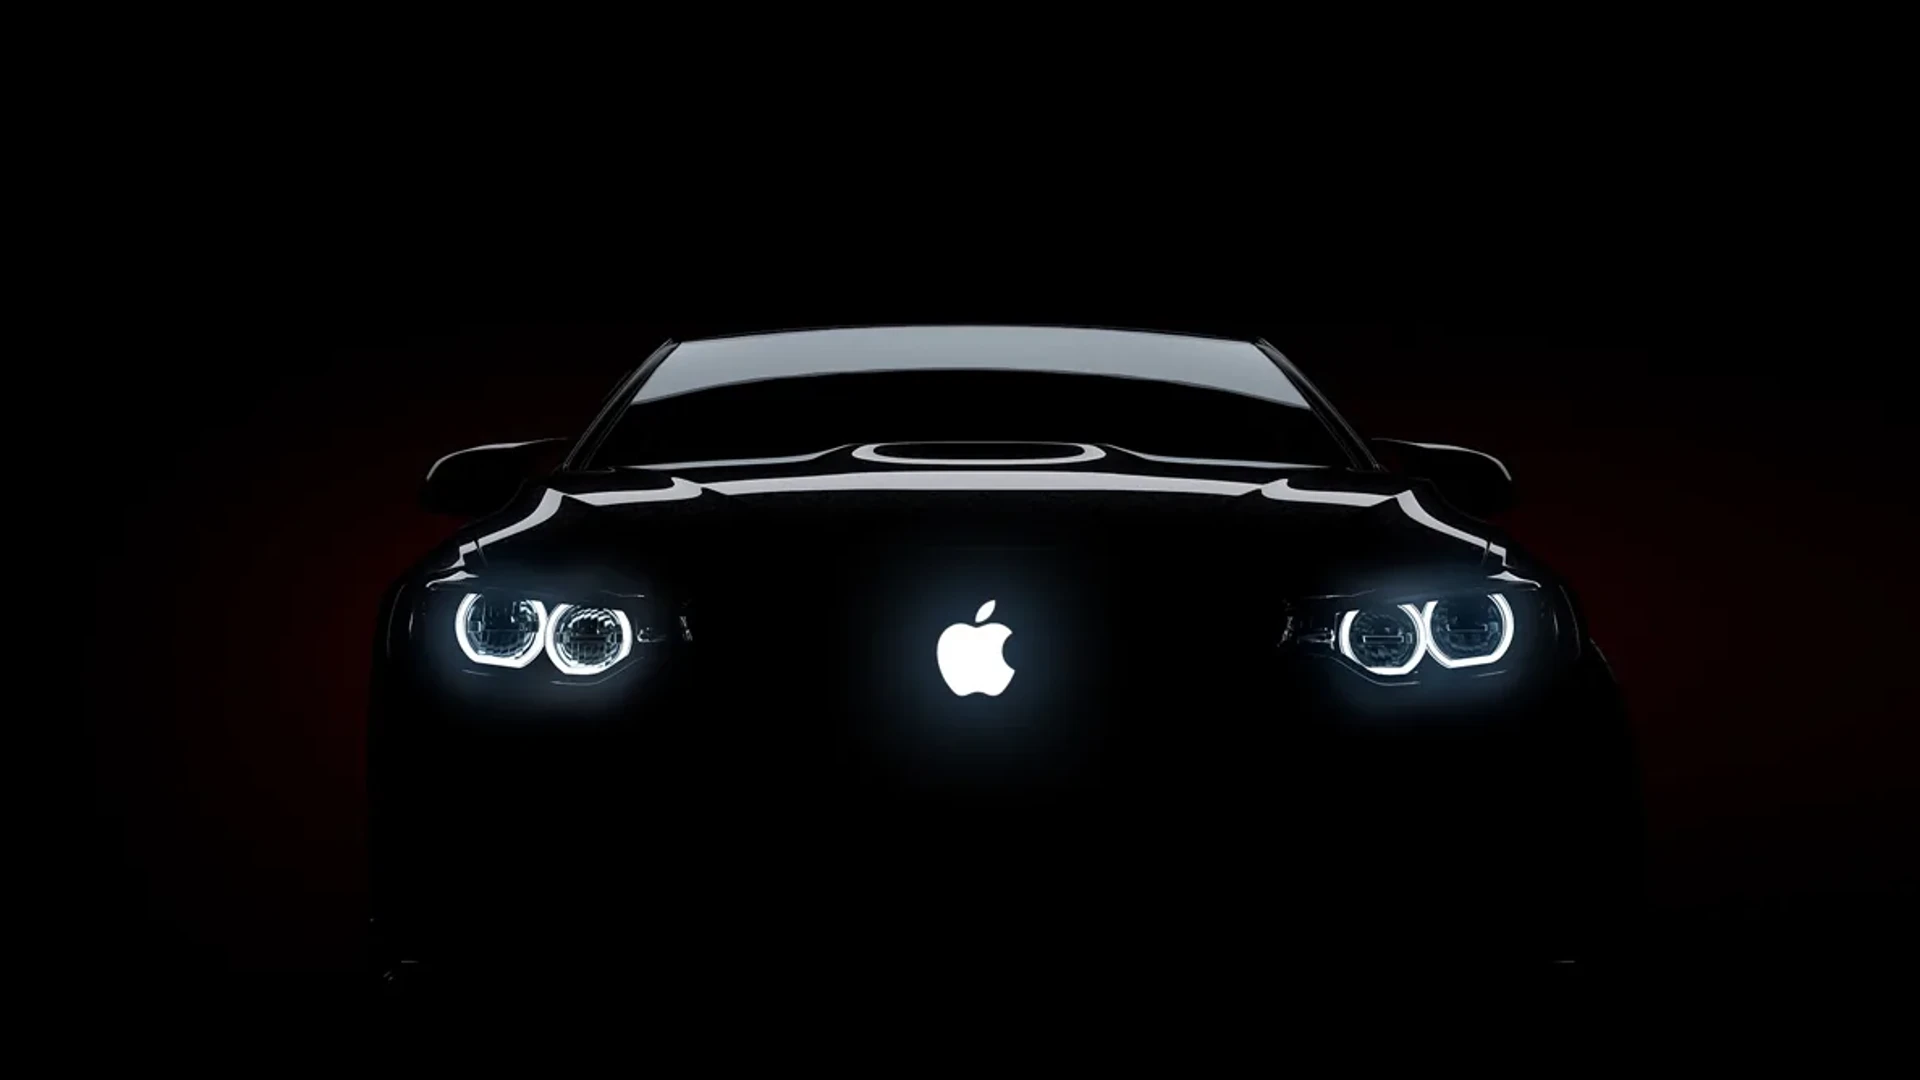 Apple intends to enter the automobile market with advanced automobiles that have yet to be released.